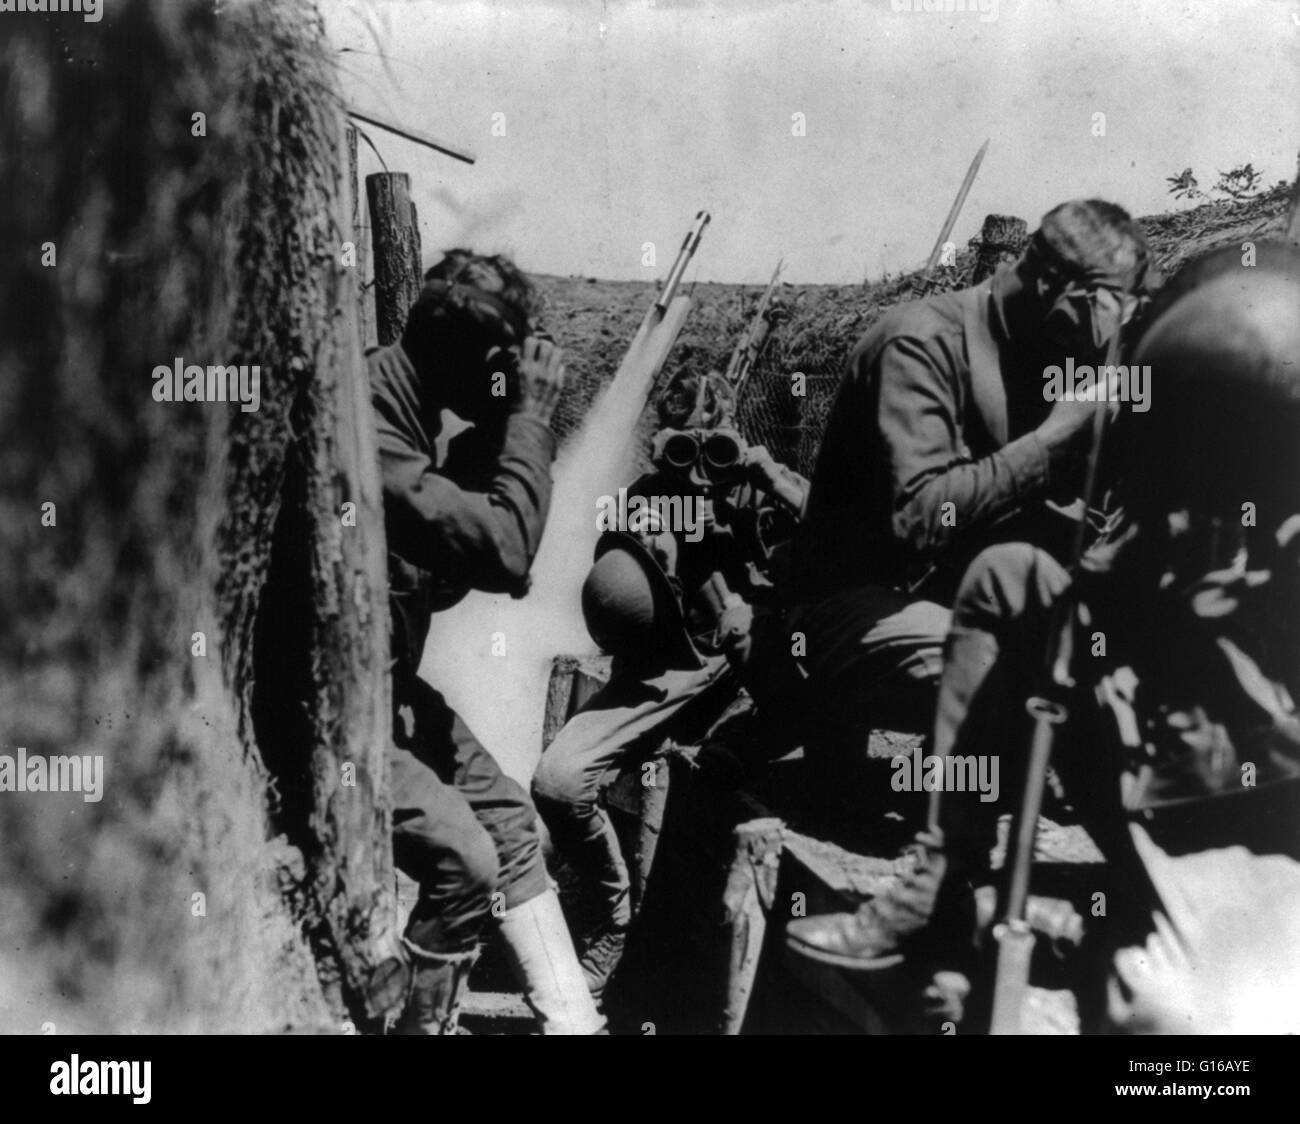 American soldiers in trench putting on gas masks, World War I. The first use of poison gas on the Western Front was on April 22, 1915, by the Germans at Ypres, against Canadian and French colonial troops. The British Royal Society of Chemistry claims that Stock Photo